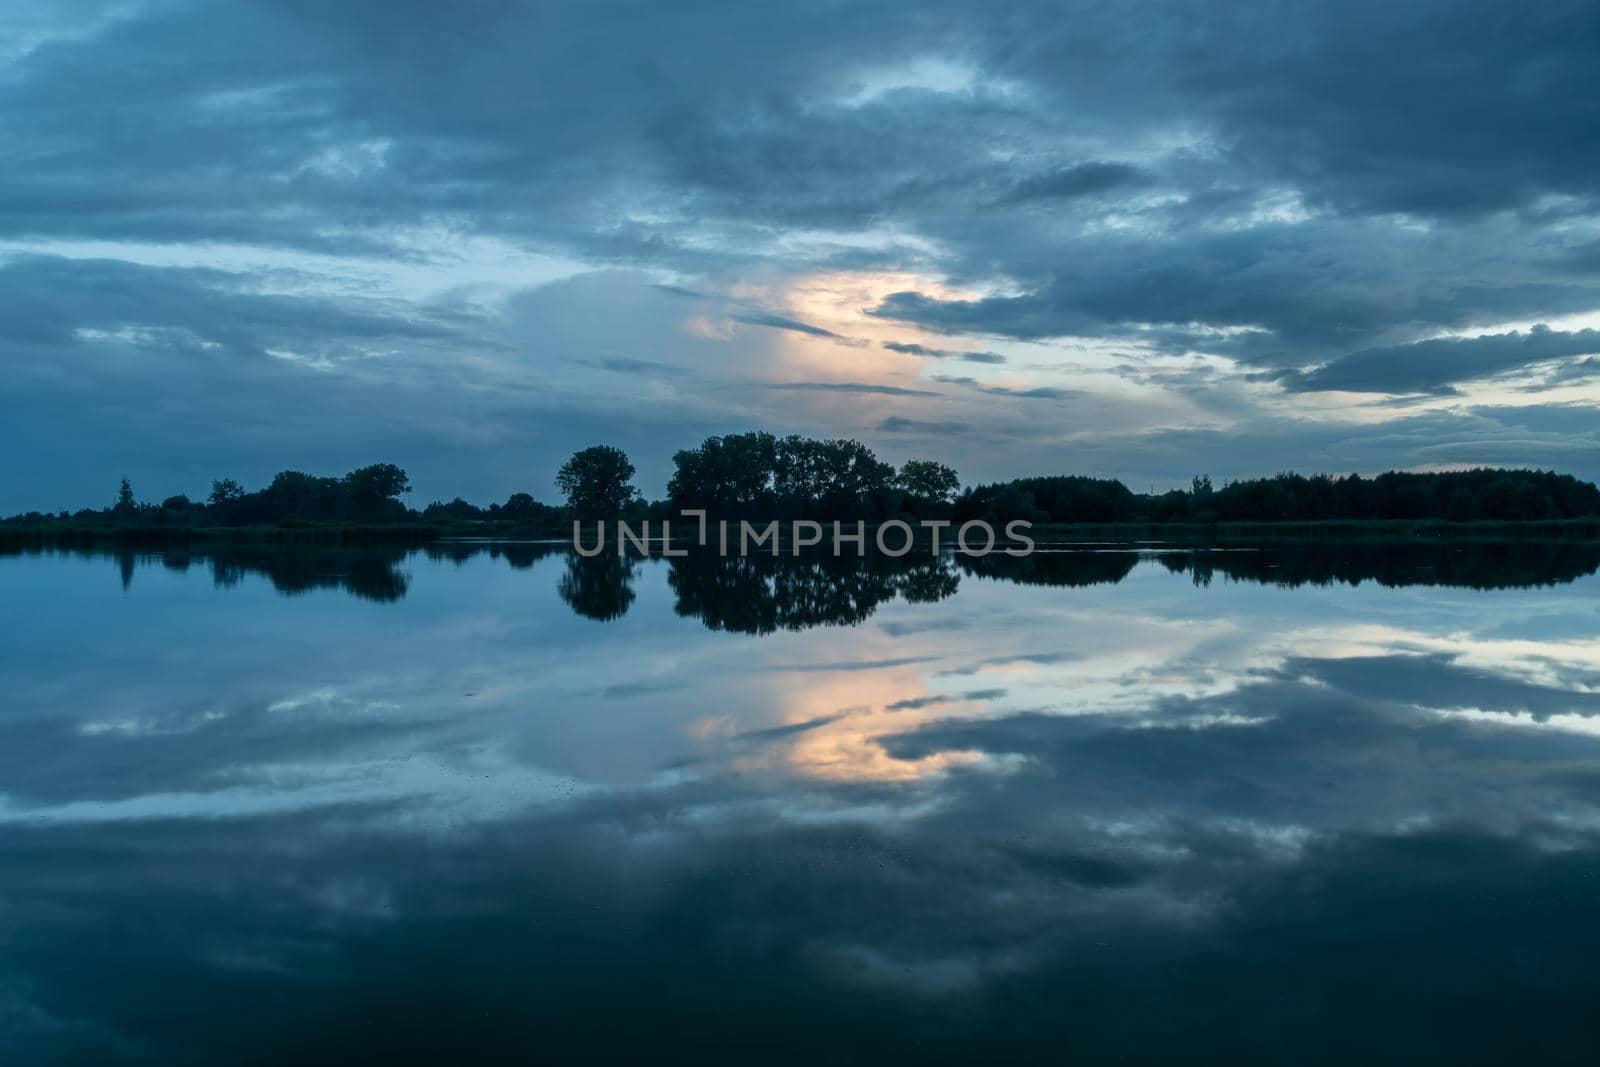 Picturesque clouds reflecting in the water, evening view by darekb22